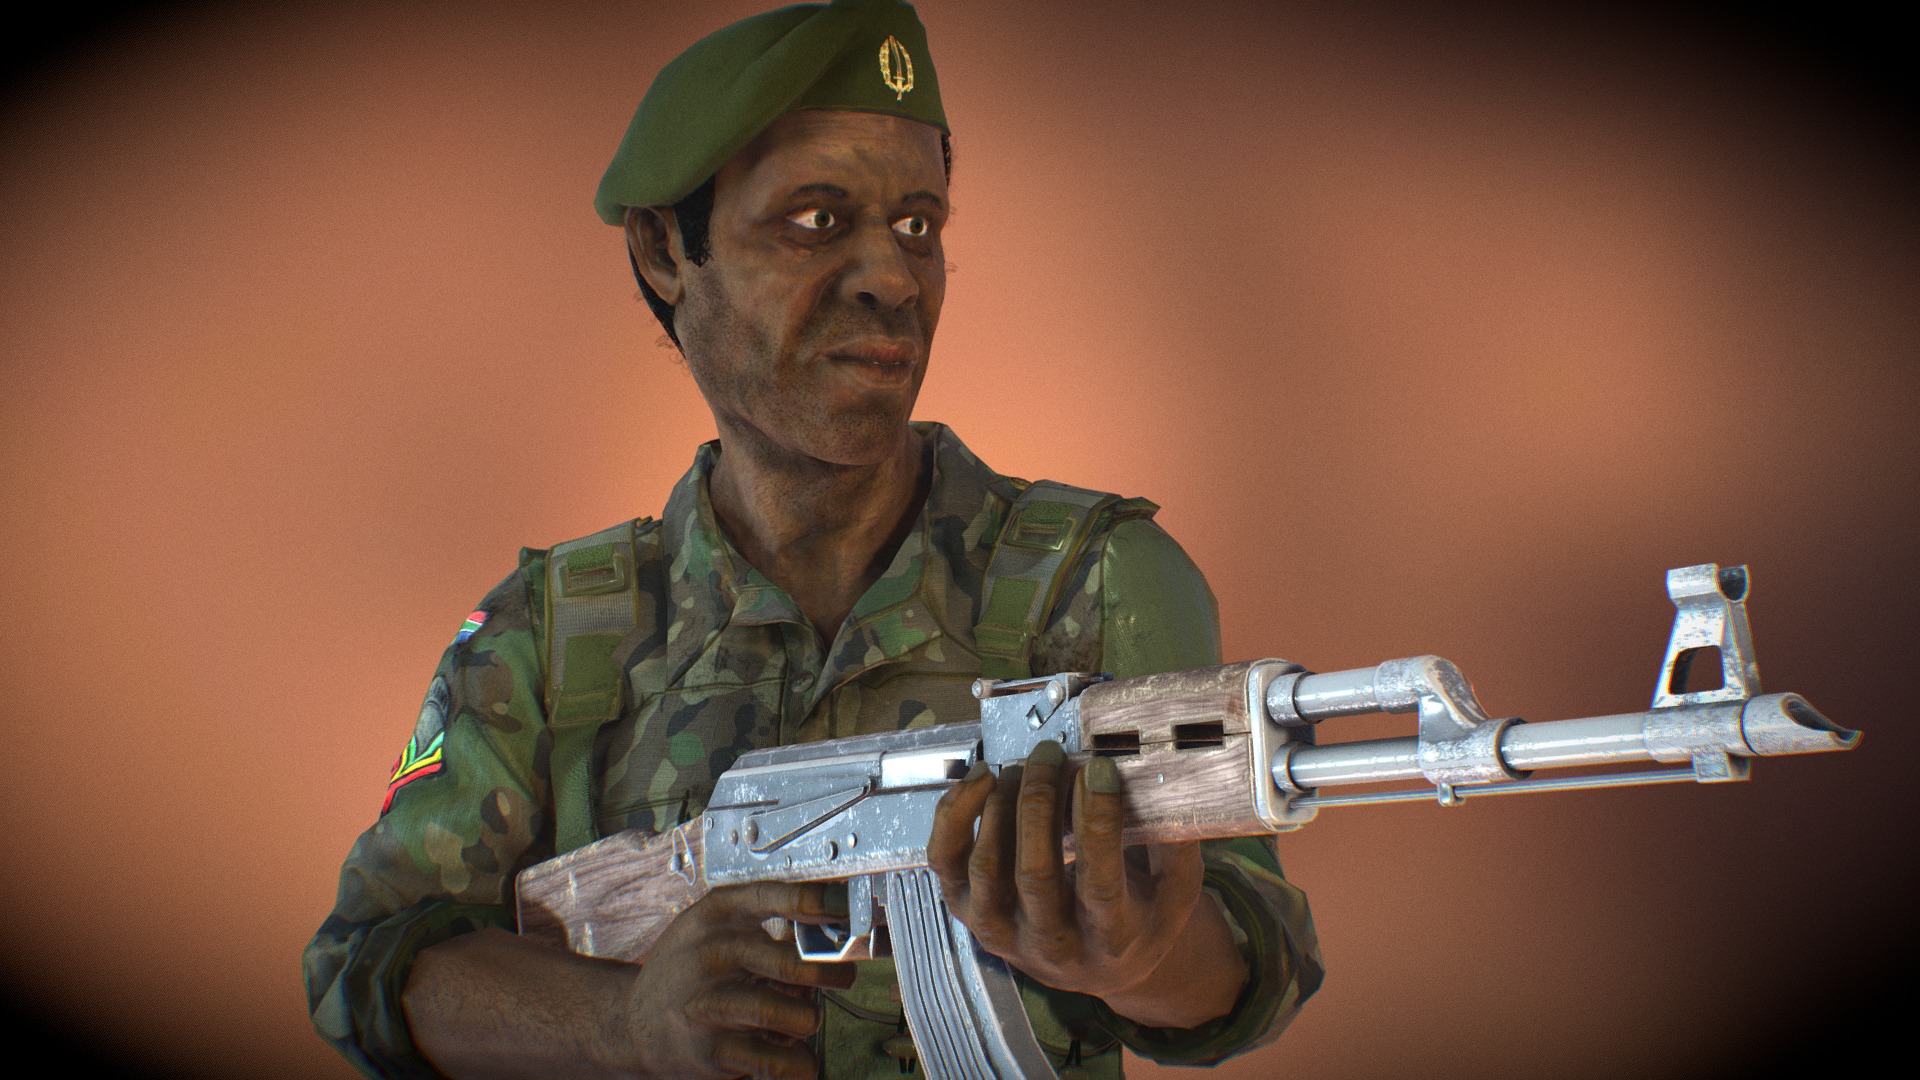 3D model African Soldier - This is a 3D model of the African Soldier. The 3D model is about a man in military uniform holding a gun.